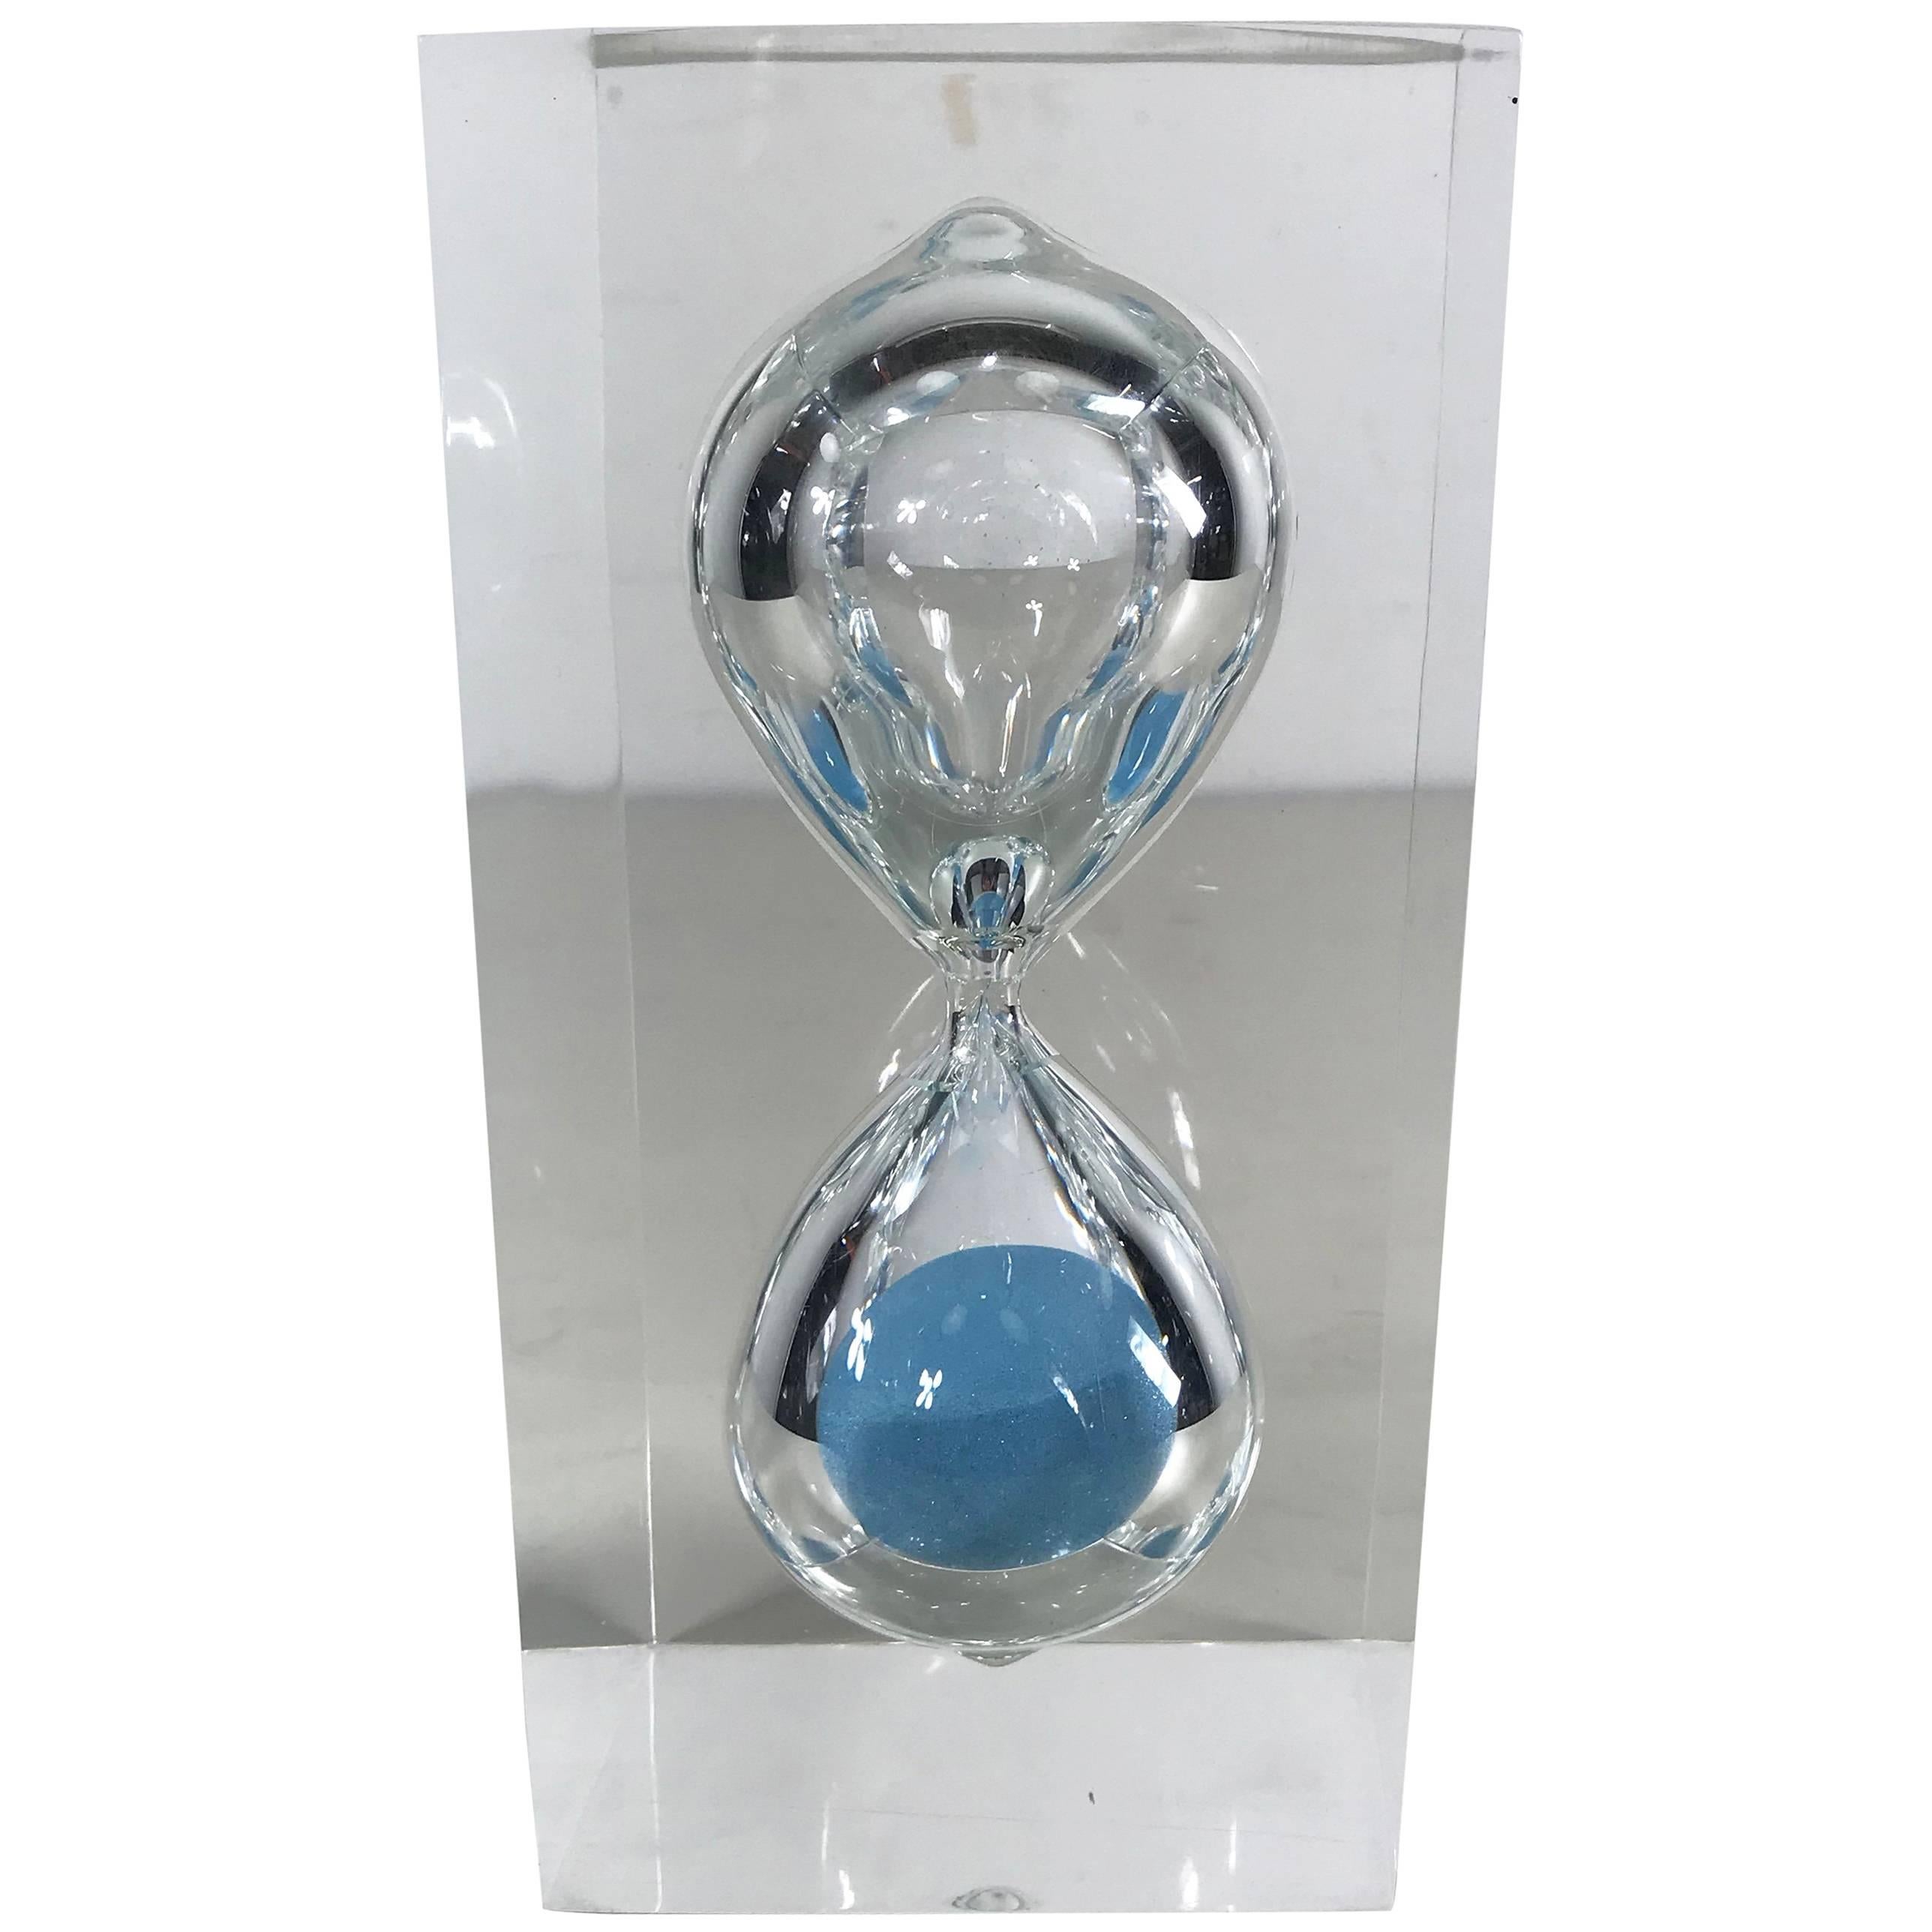 Modernist Lucite Hourglass Sculpture with Ice Blue Sand, Franco Scuderi